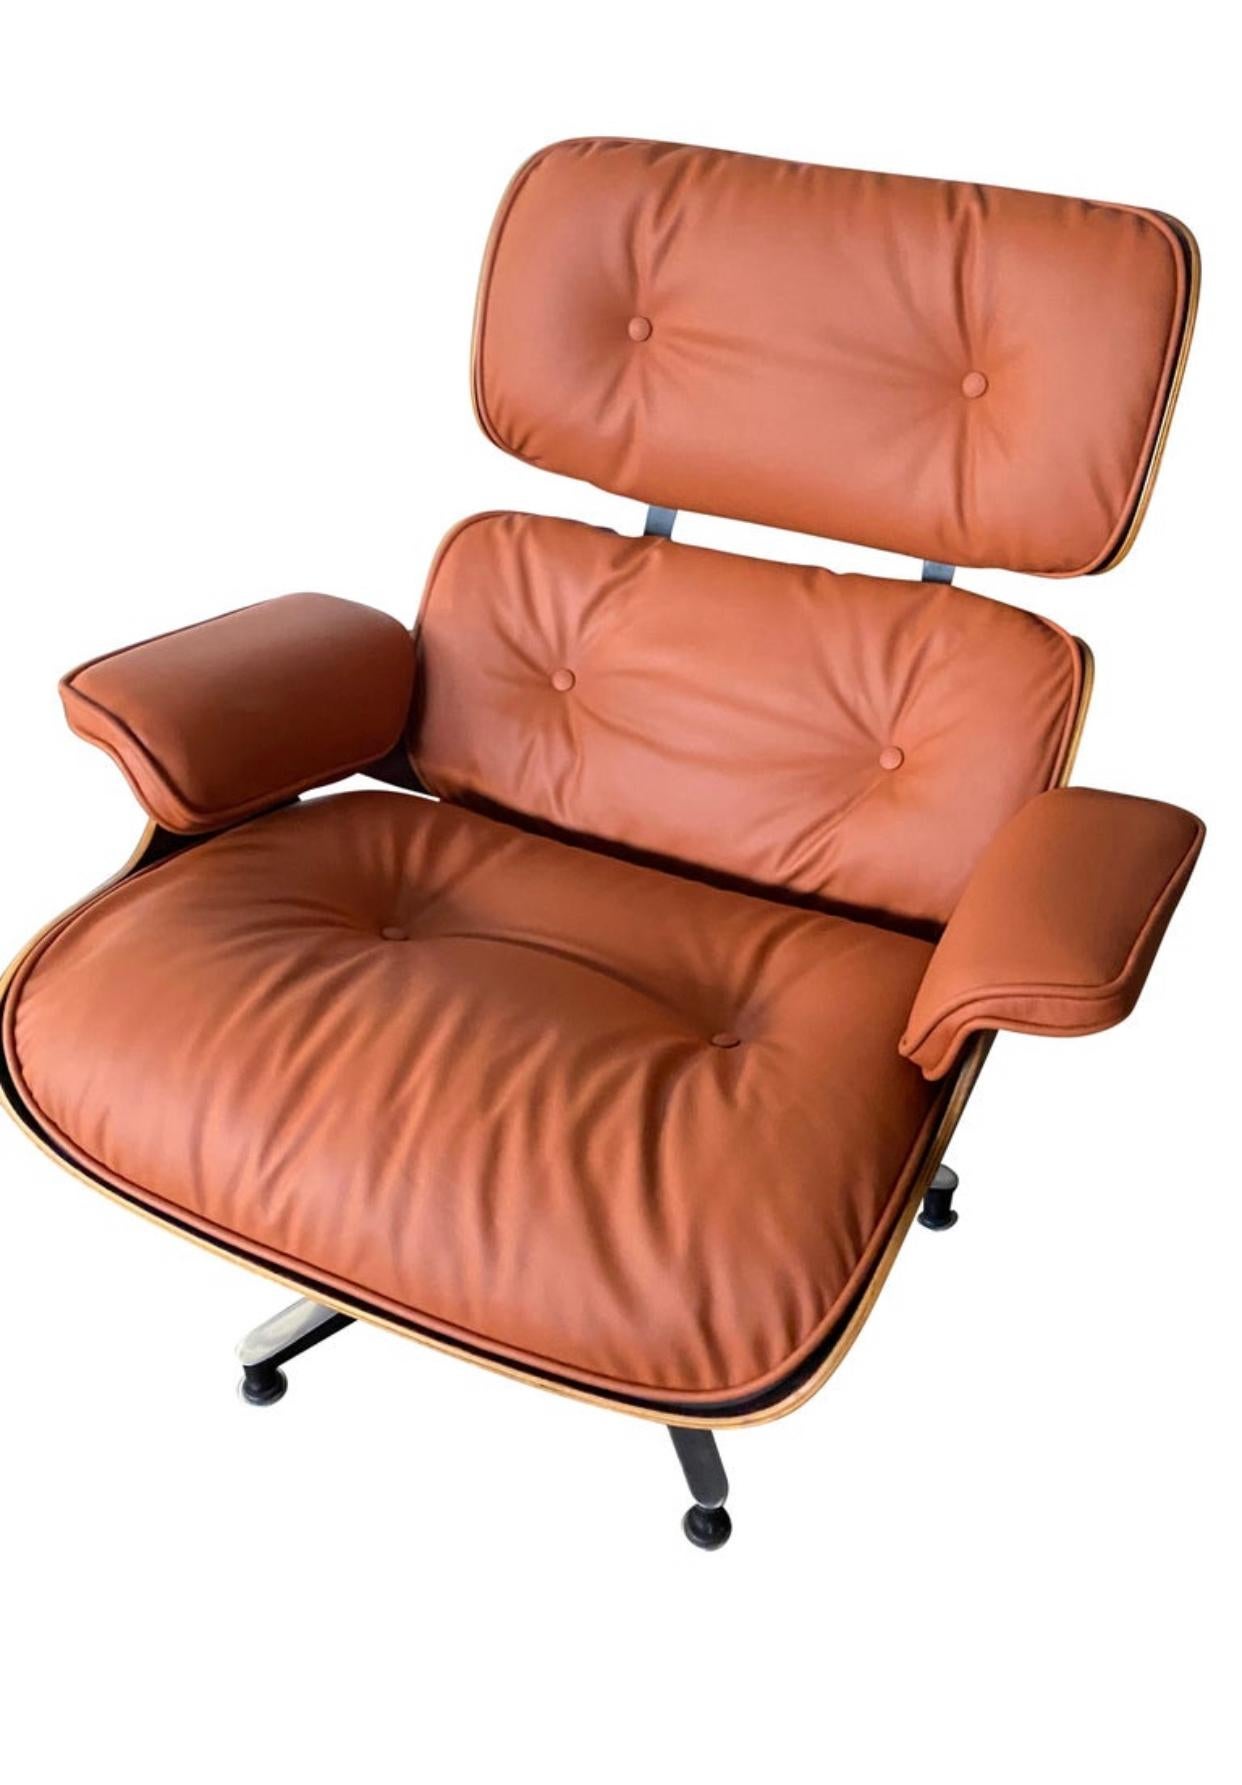 Mid-Century Modern Eames Lounge Chair and Ottoman in Burnt Orange